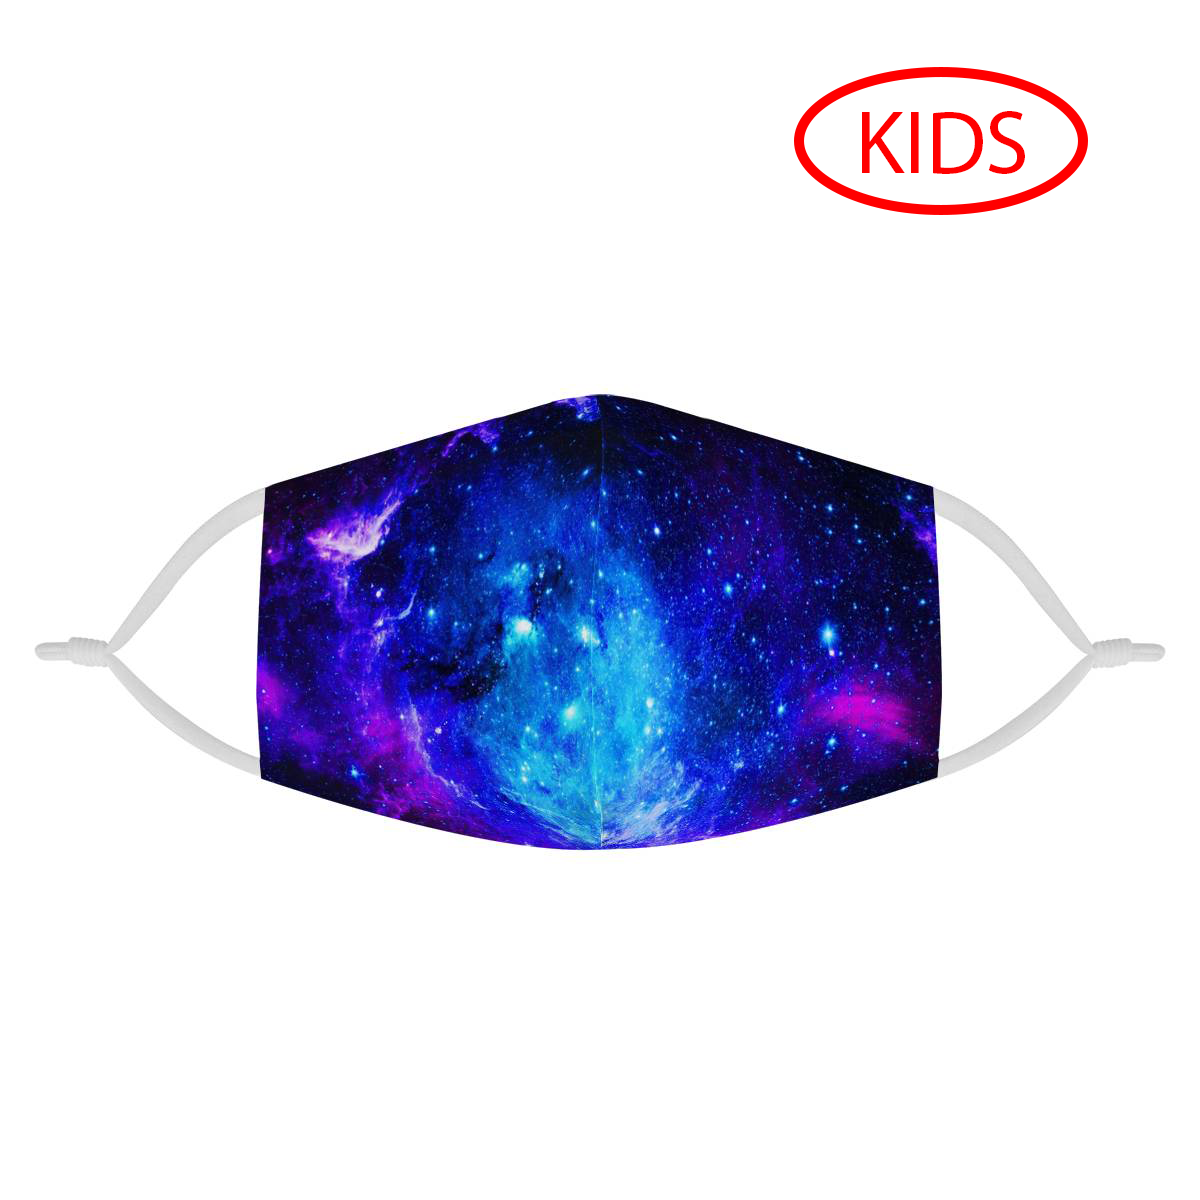 BLUE GALAXY - KIDS MASK WITH (4) PM 2.5 CARBON FILTERS